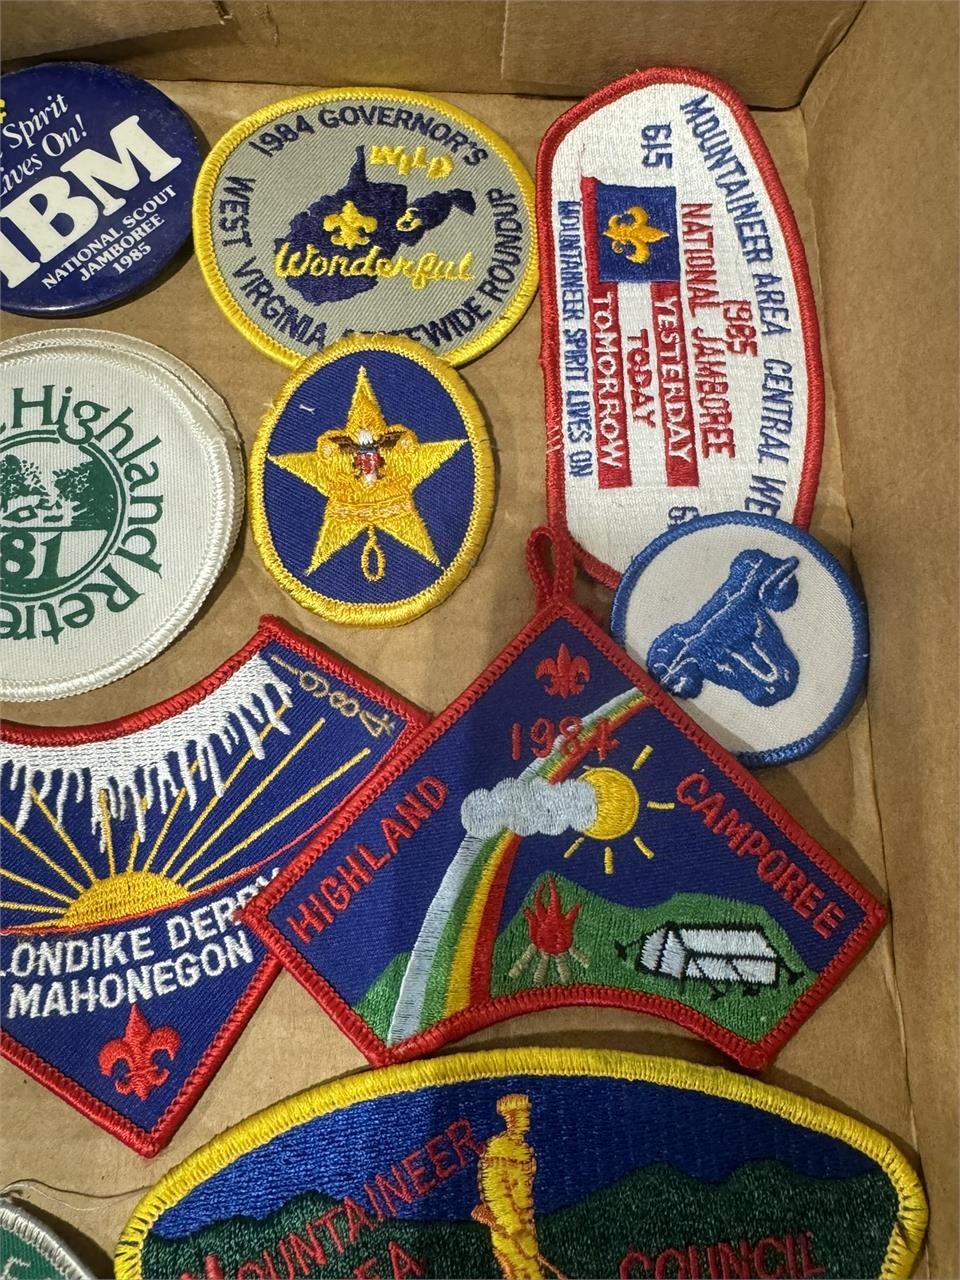 BOY SCOUT PATCHES